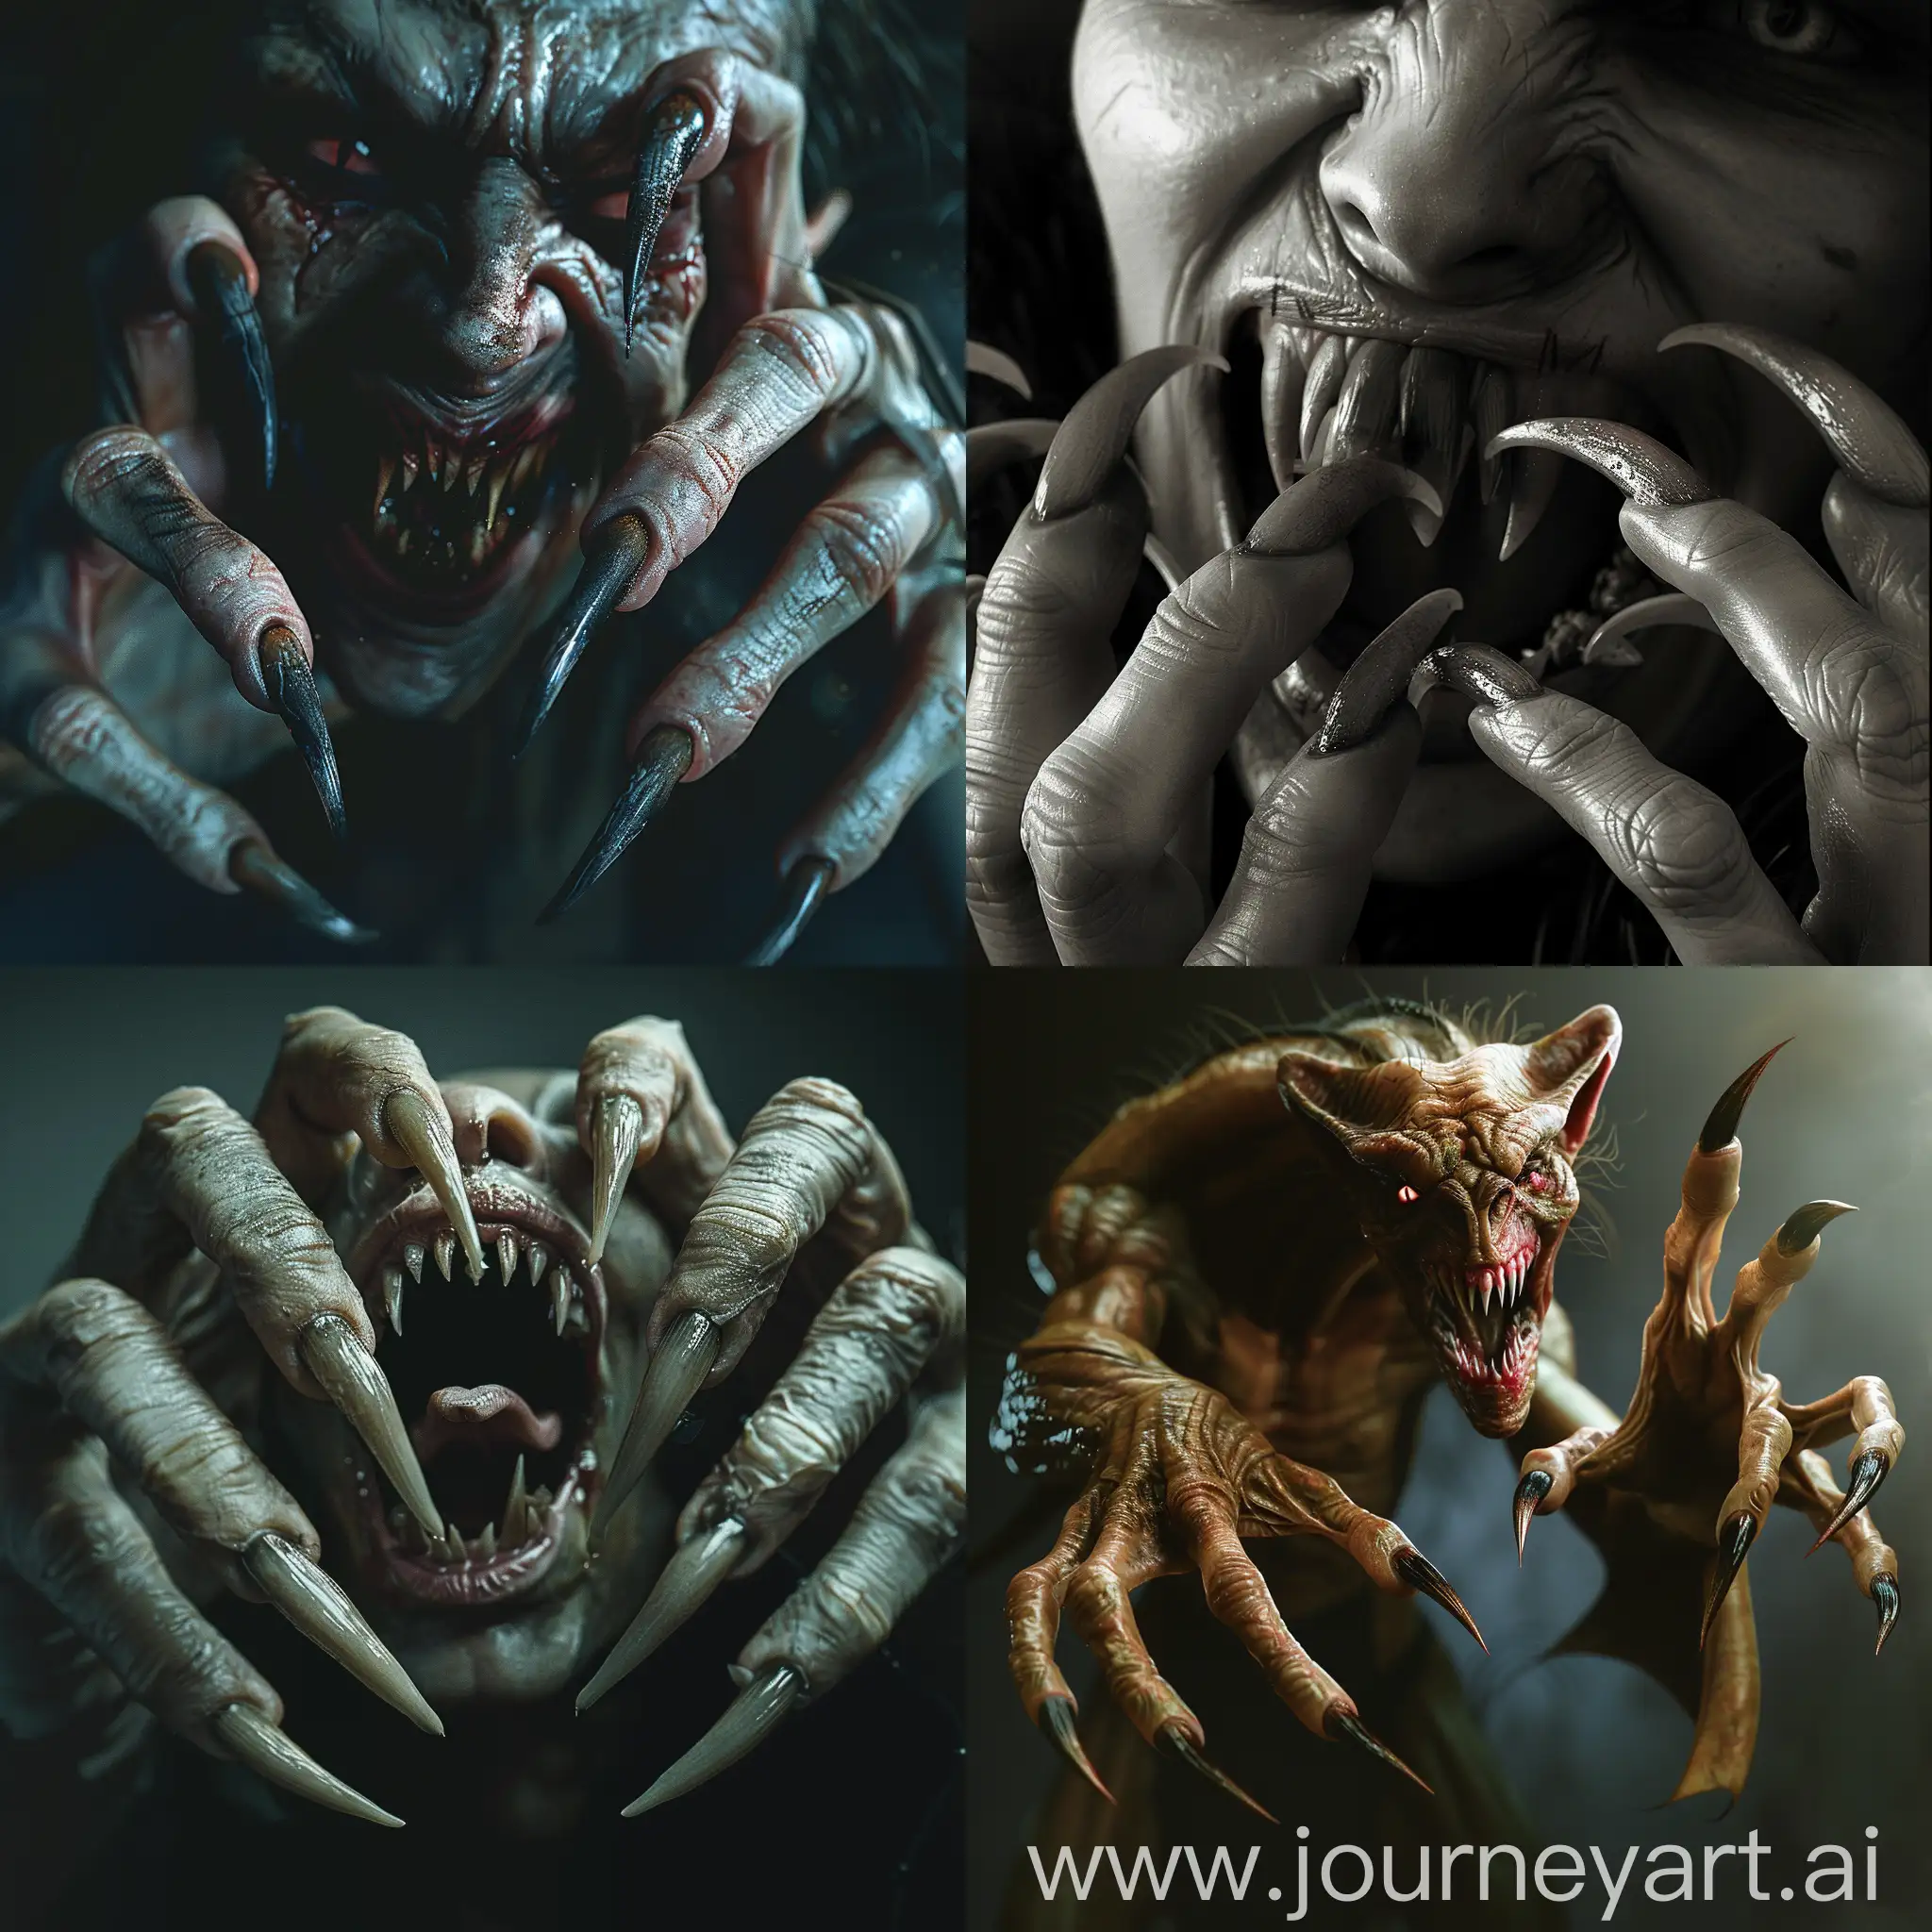 Photorealism of creature a monstruos female vampire with long curved pointed  nails, she aggressive attack, pointed crocked teeth scary expression, dark atmosphere, high quality, photorealistic, terrifying, aggressive,scary predator fangs, detailed nails, horror, atmospheric lighting, full body, realistic hyper - detail, playful character designs, full anatomical. human hands, very clear without flaws with five fingers